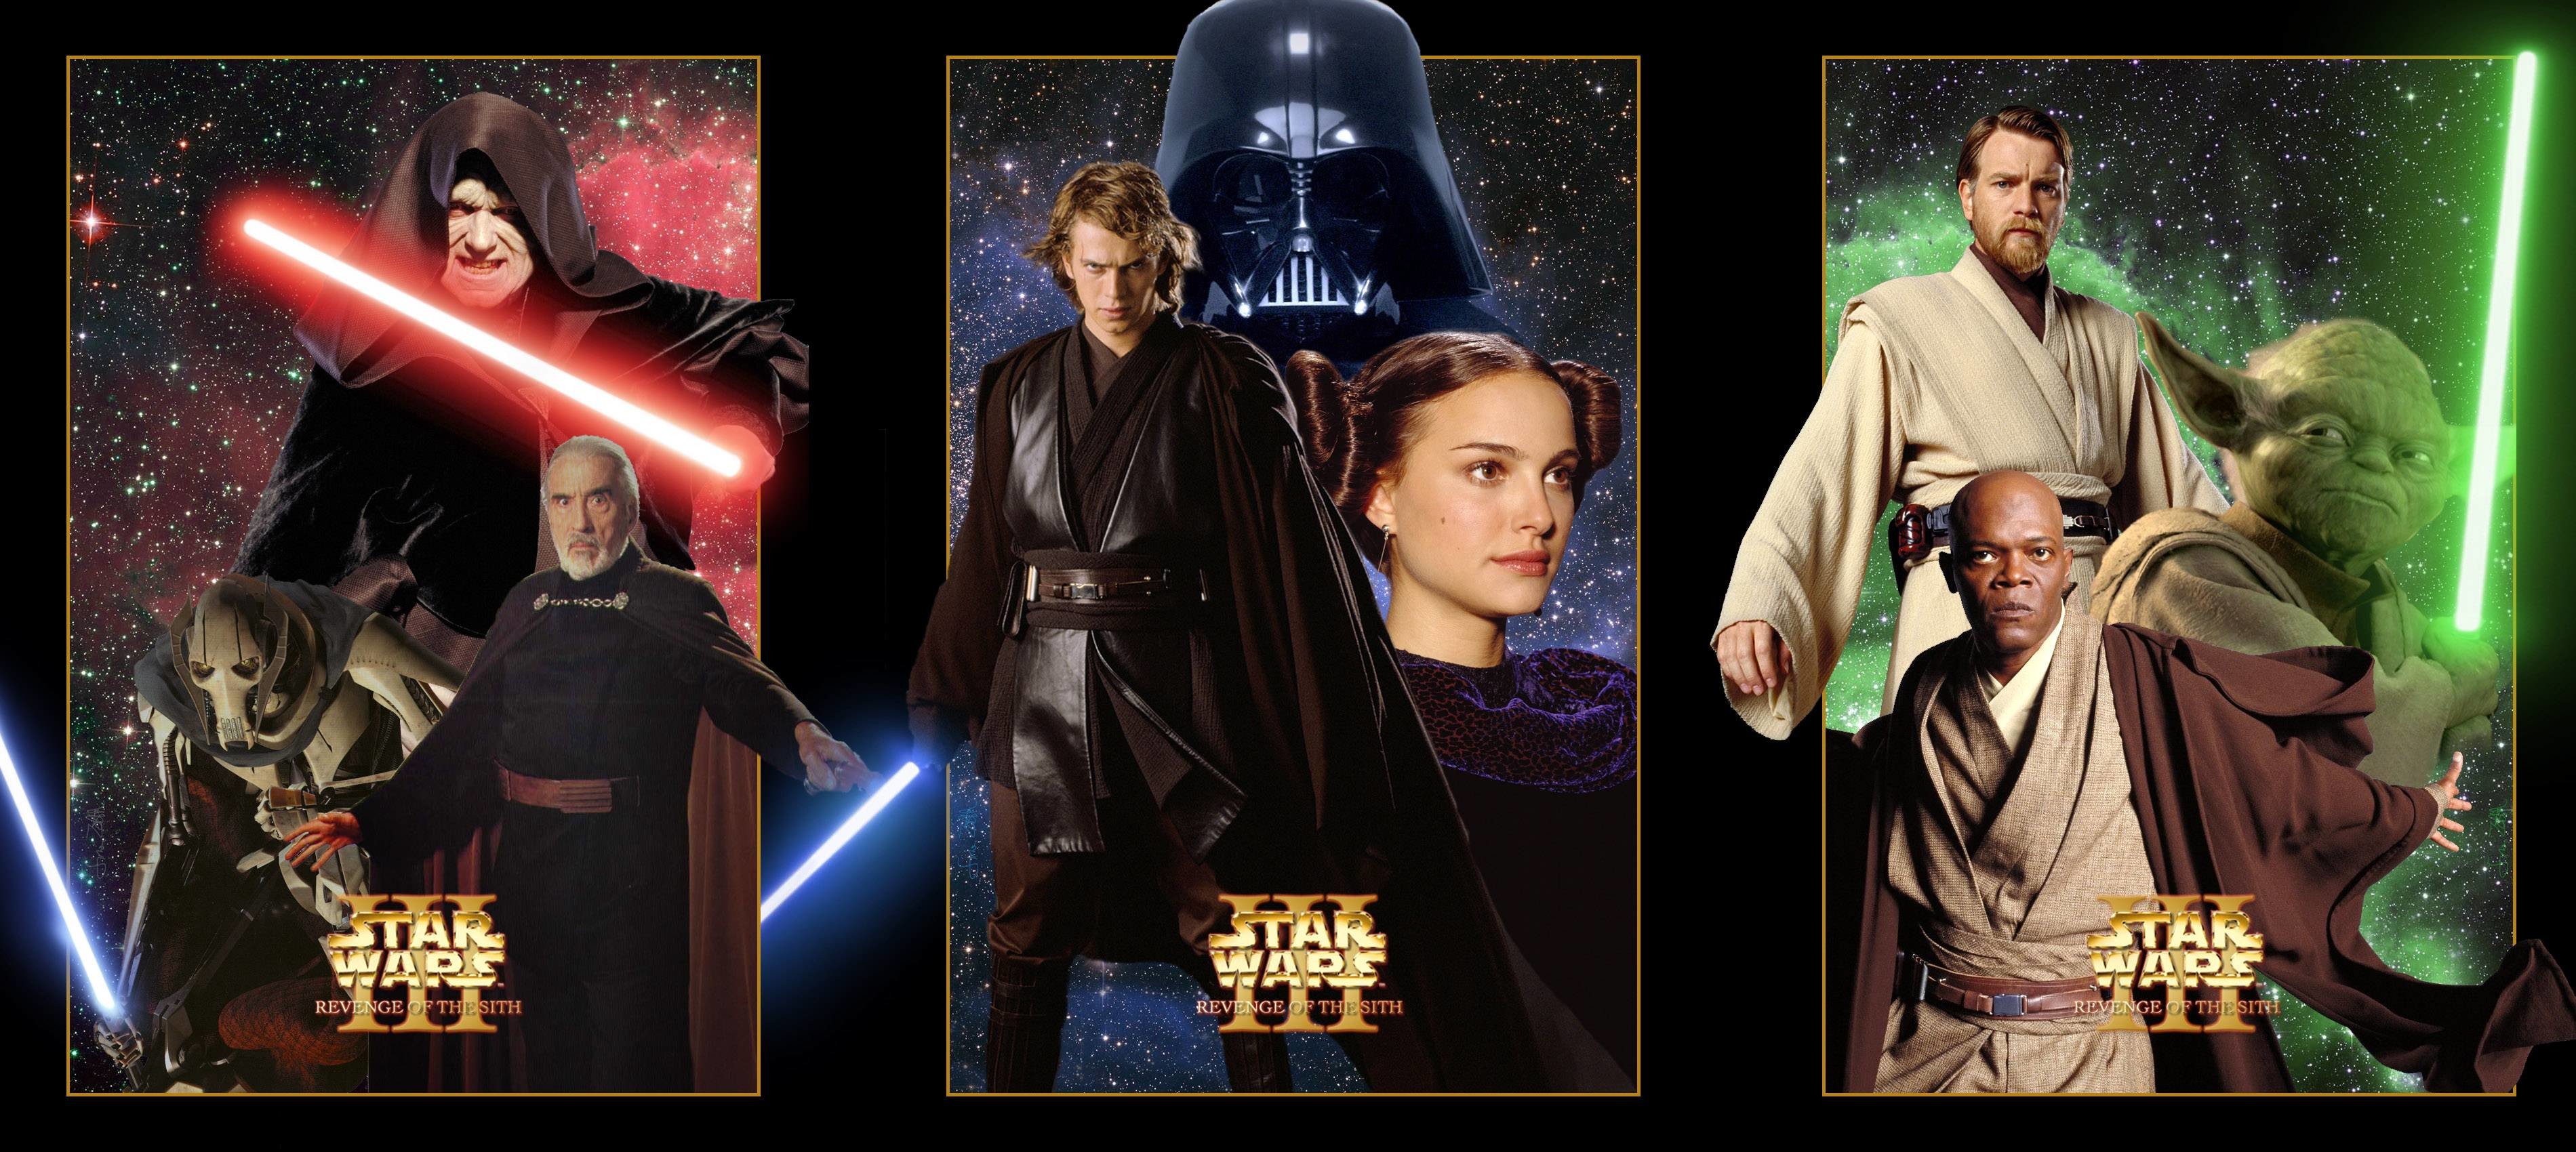 3800x1700 Anakin skywalker did not die for you to hate on the star wars prequels!